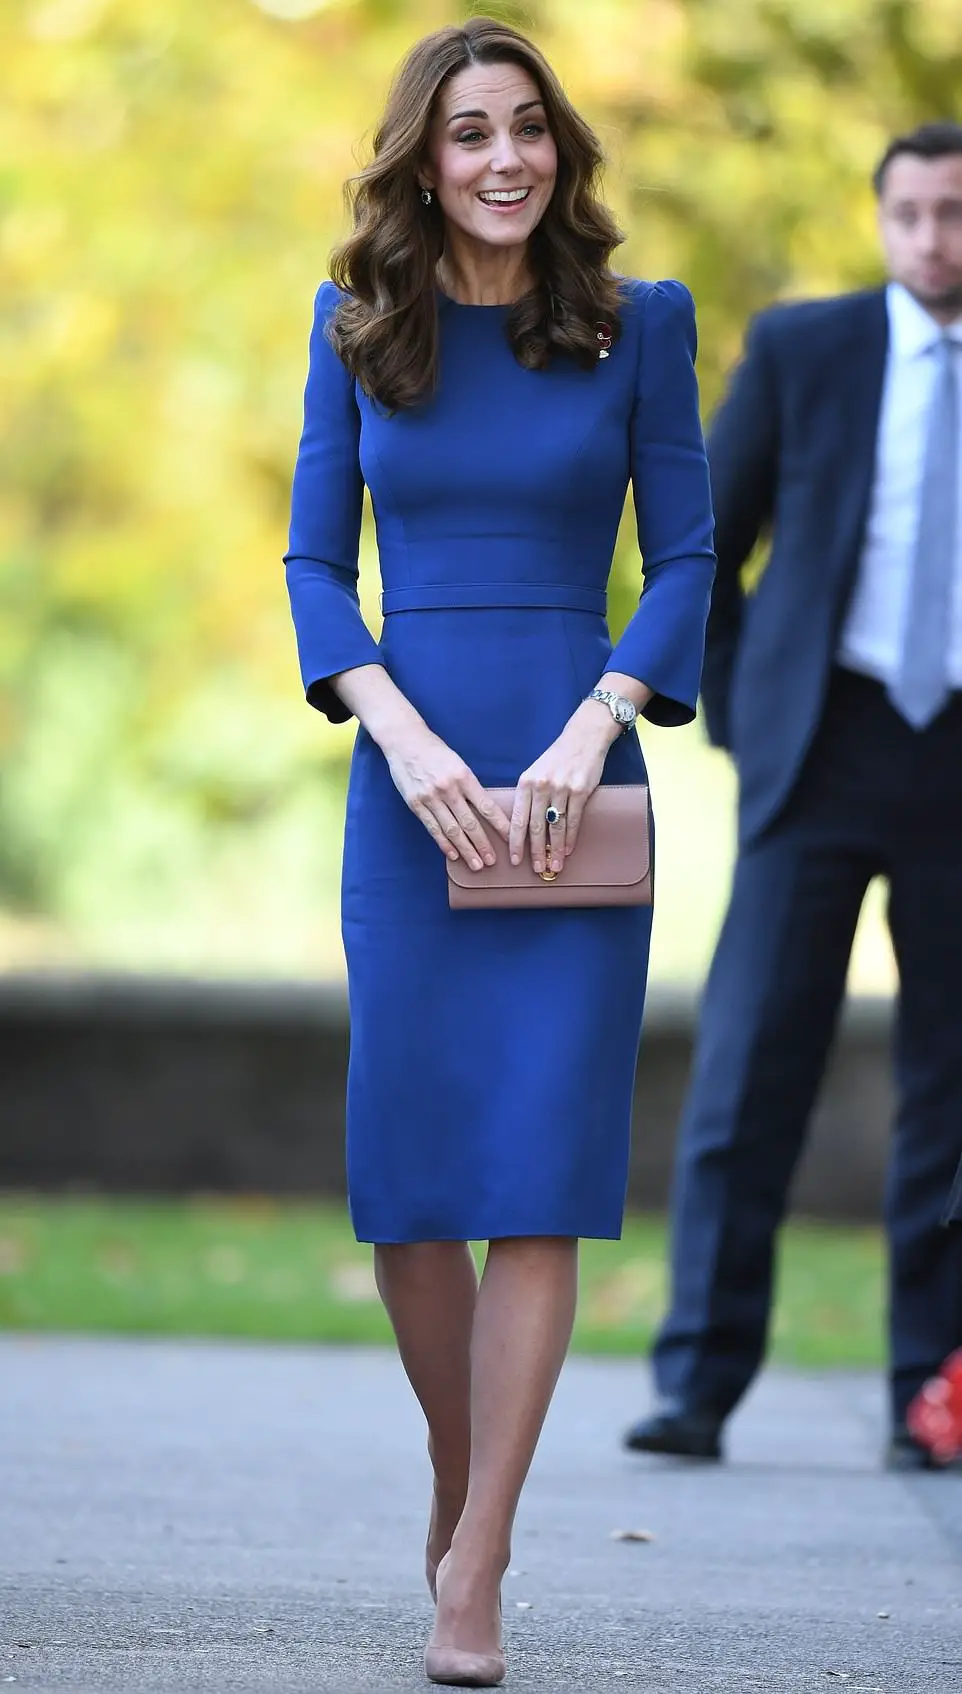 The Duchess of Cambridge got emotional after looking at her great-grandfather's letters